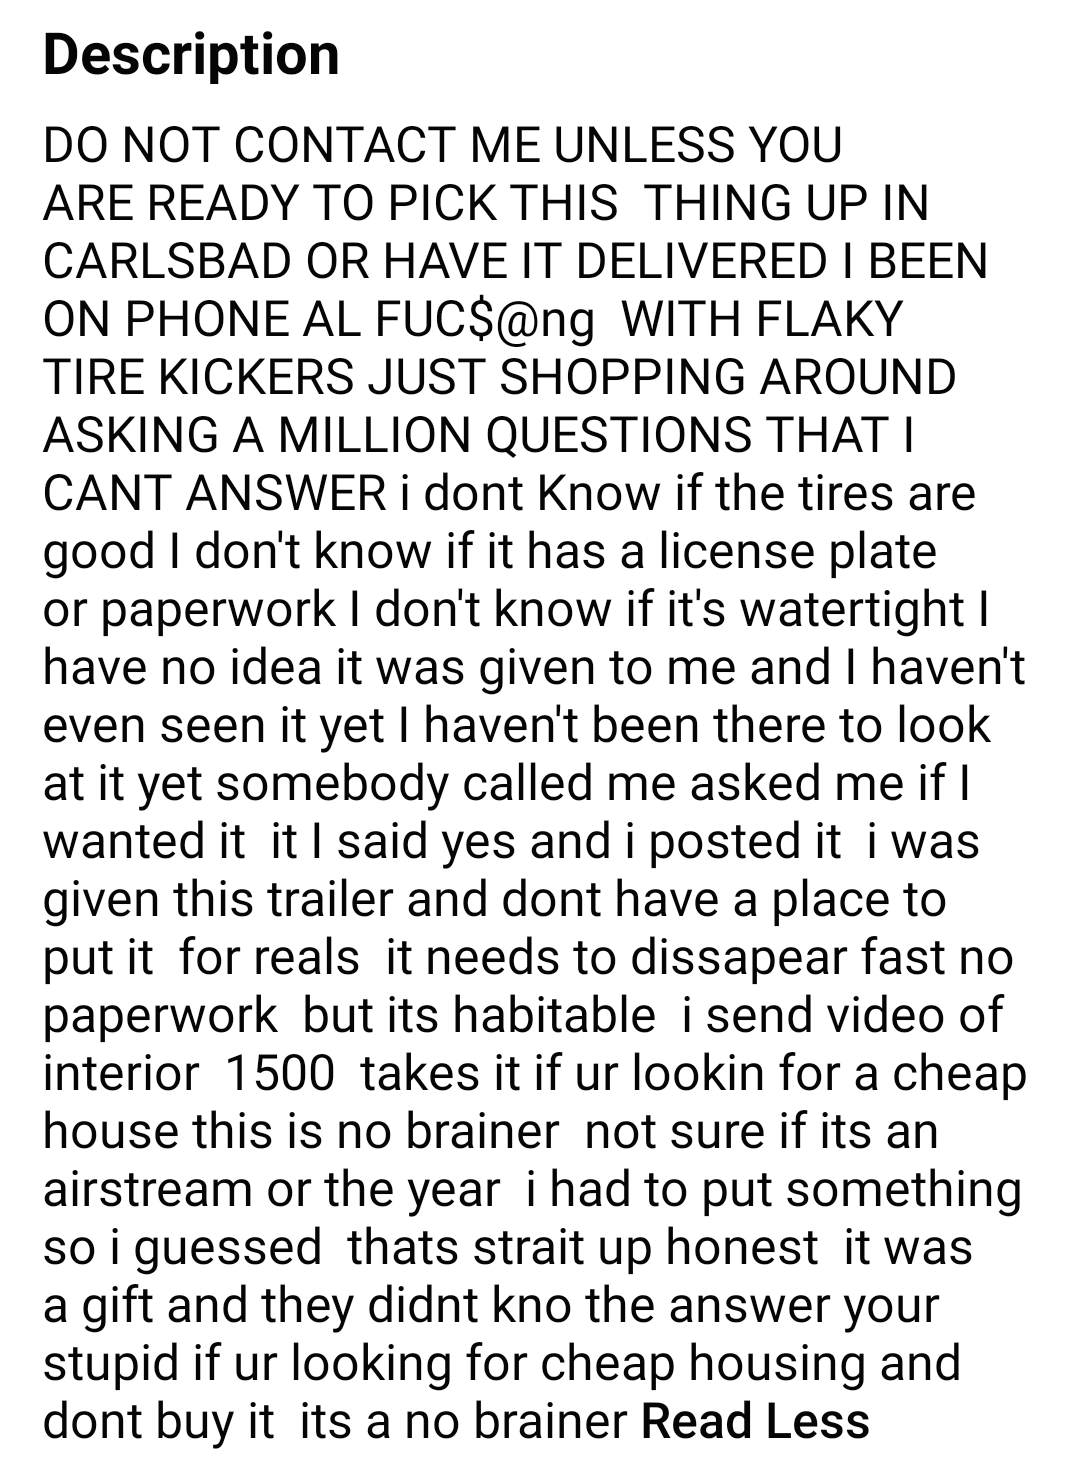 entitled people - burmese font - Description Do Not Contact Me Unless You Are Ready To Pick This Thing Up In Carlsbad Or Have It Delivered I Been On Phone Al Fuc$ With Flaky Tire Kickers Just Shopping Around Asking A Million Questions That I Cant Answer i